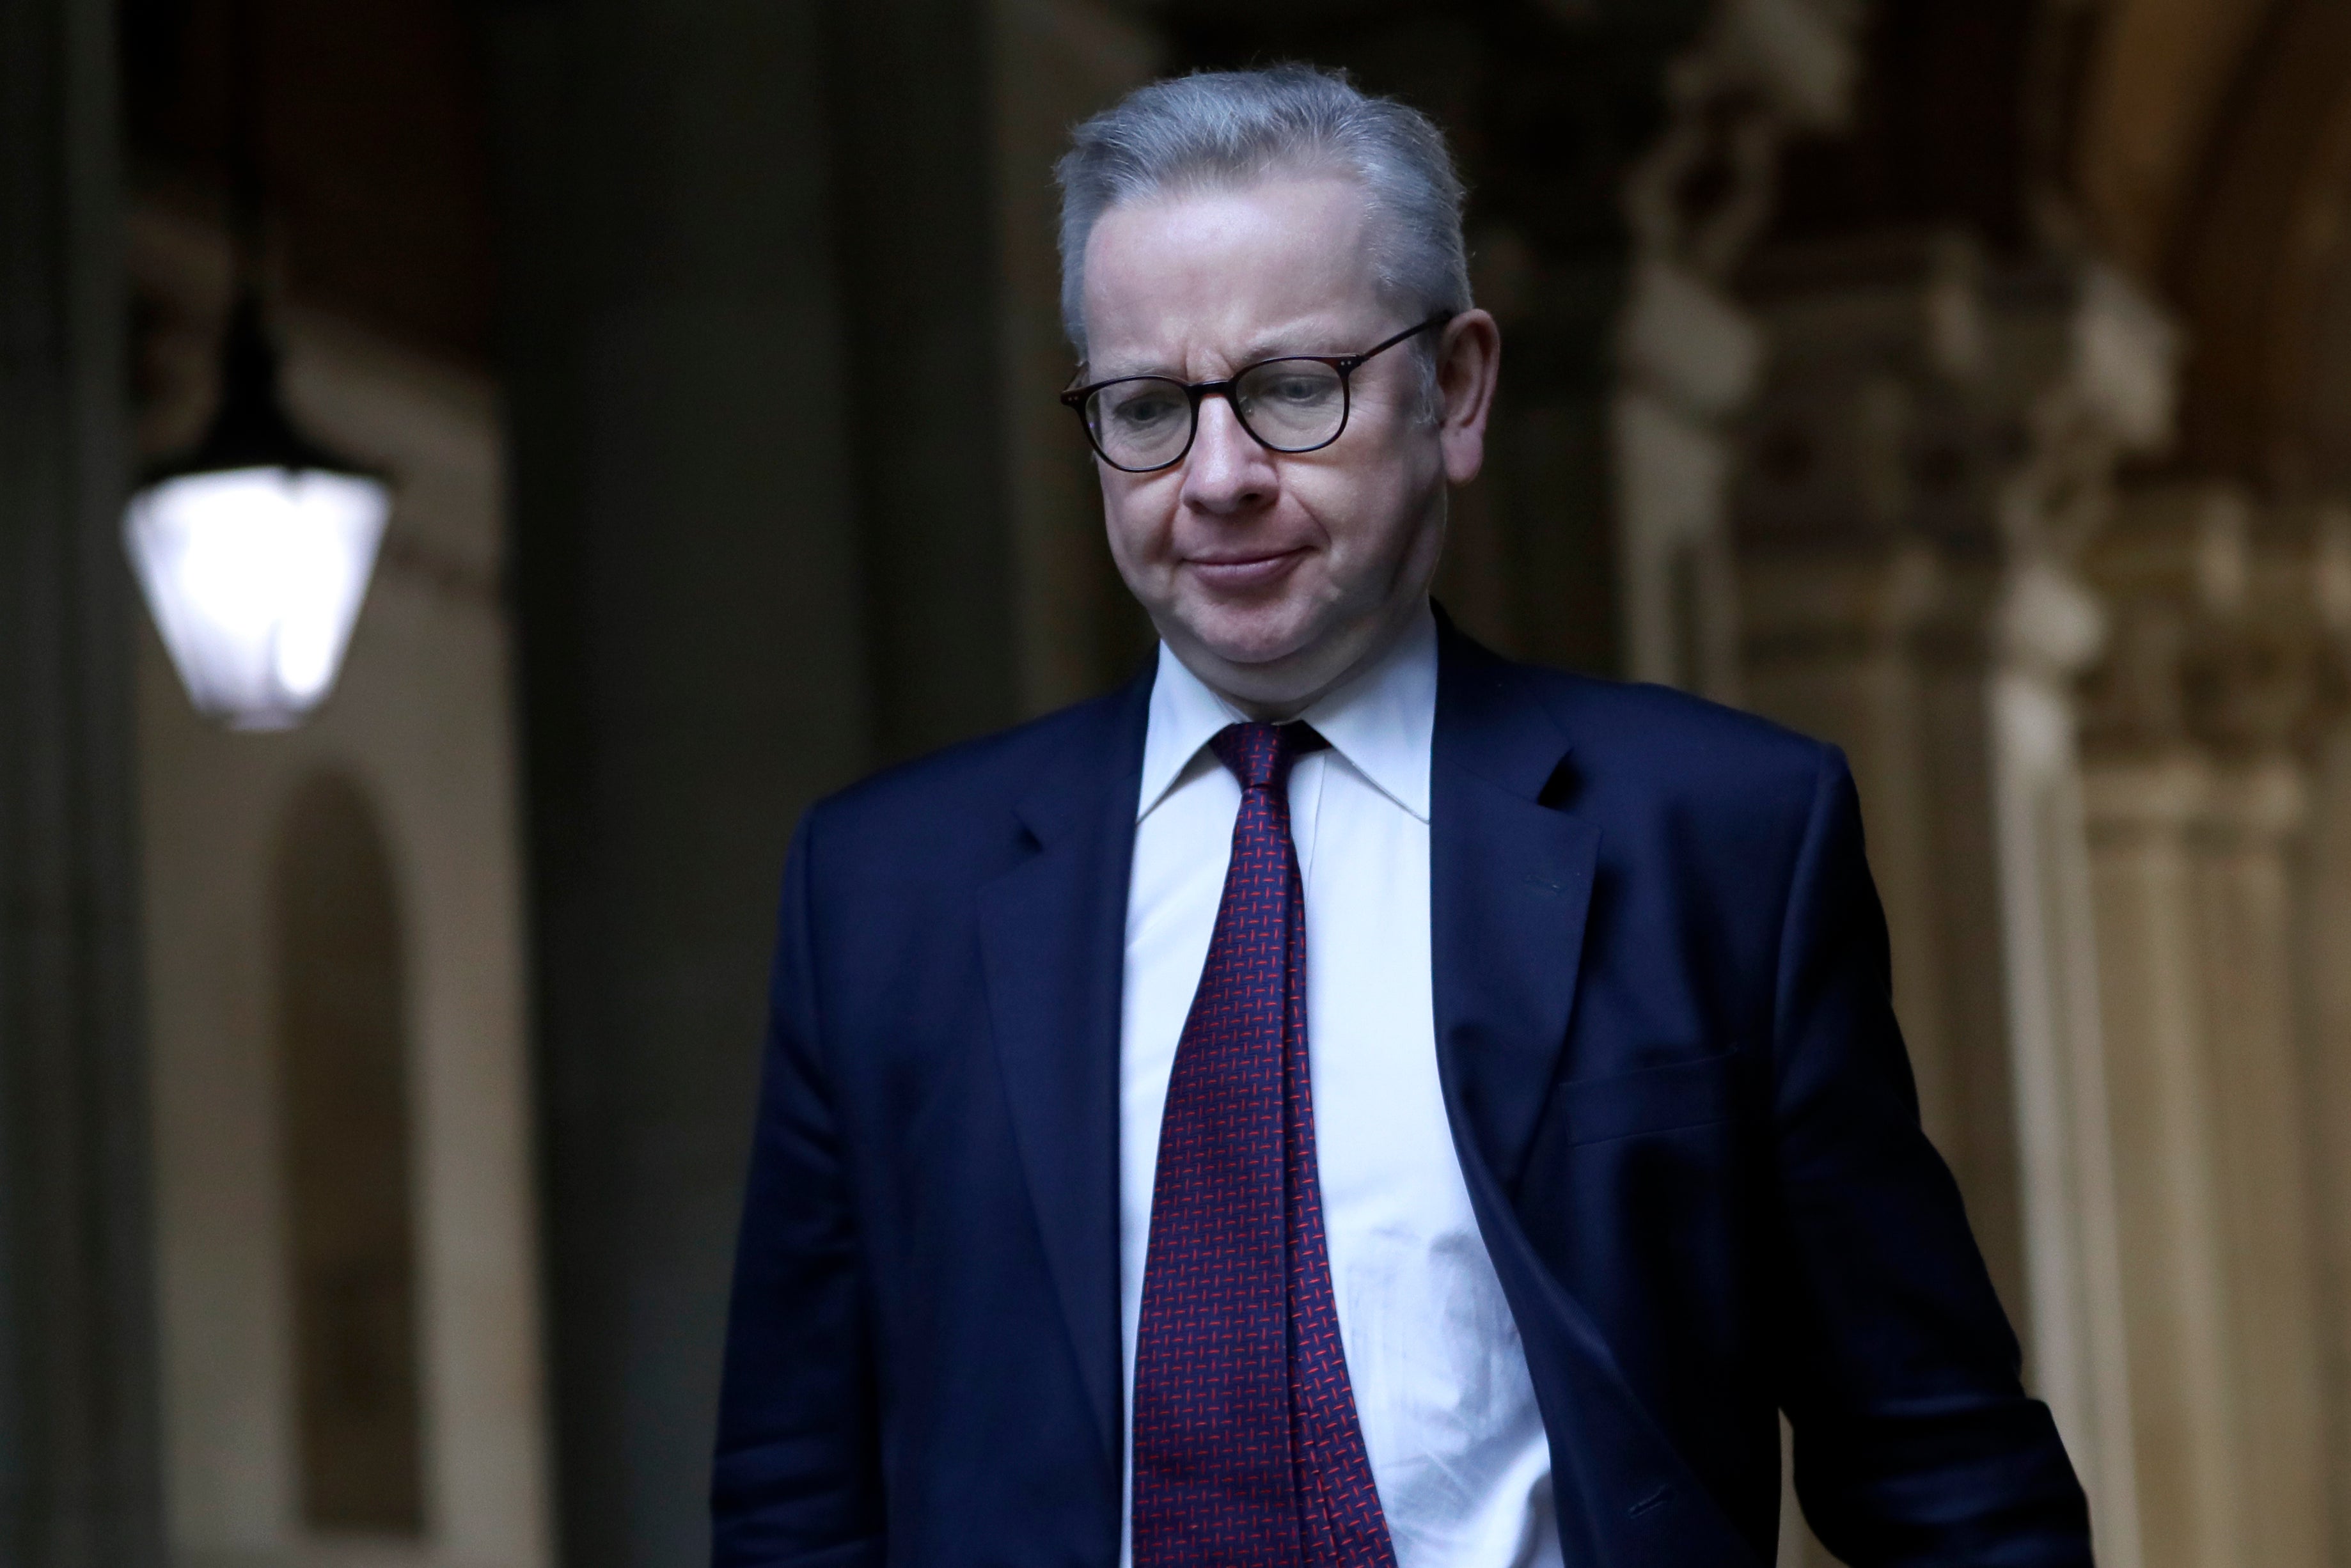 Gove is set to pause scheduled radical changes in planning rules